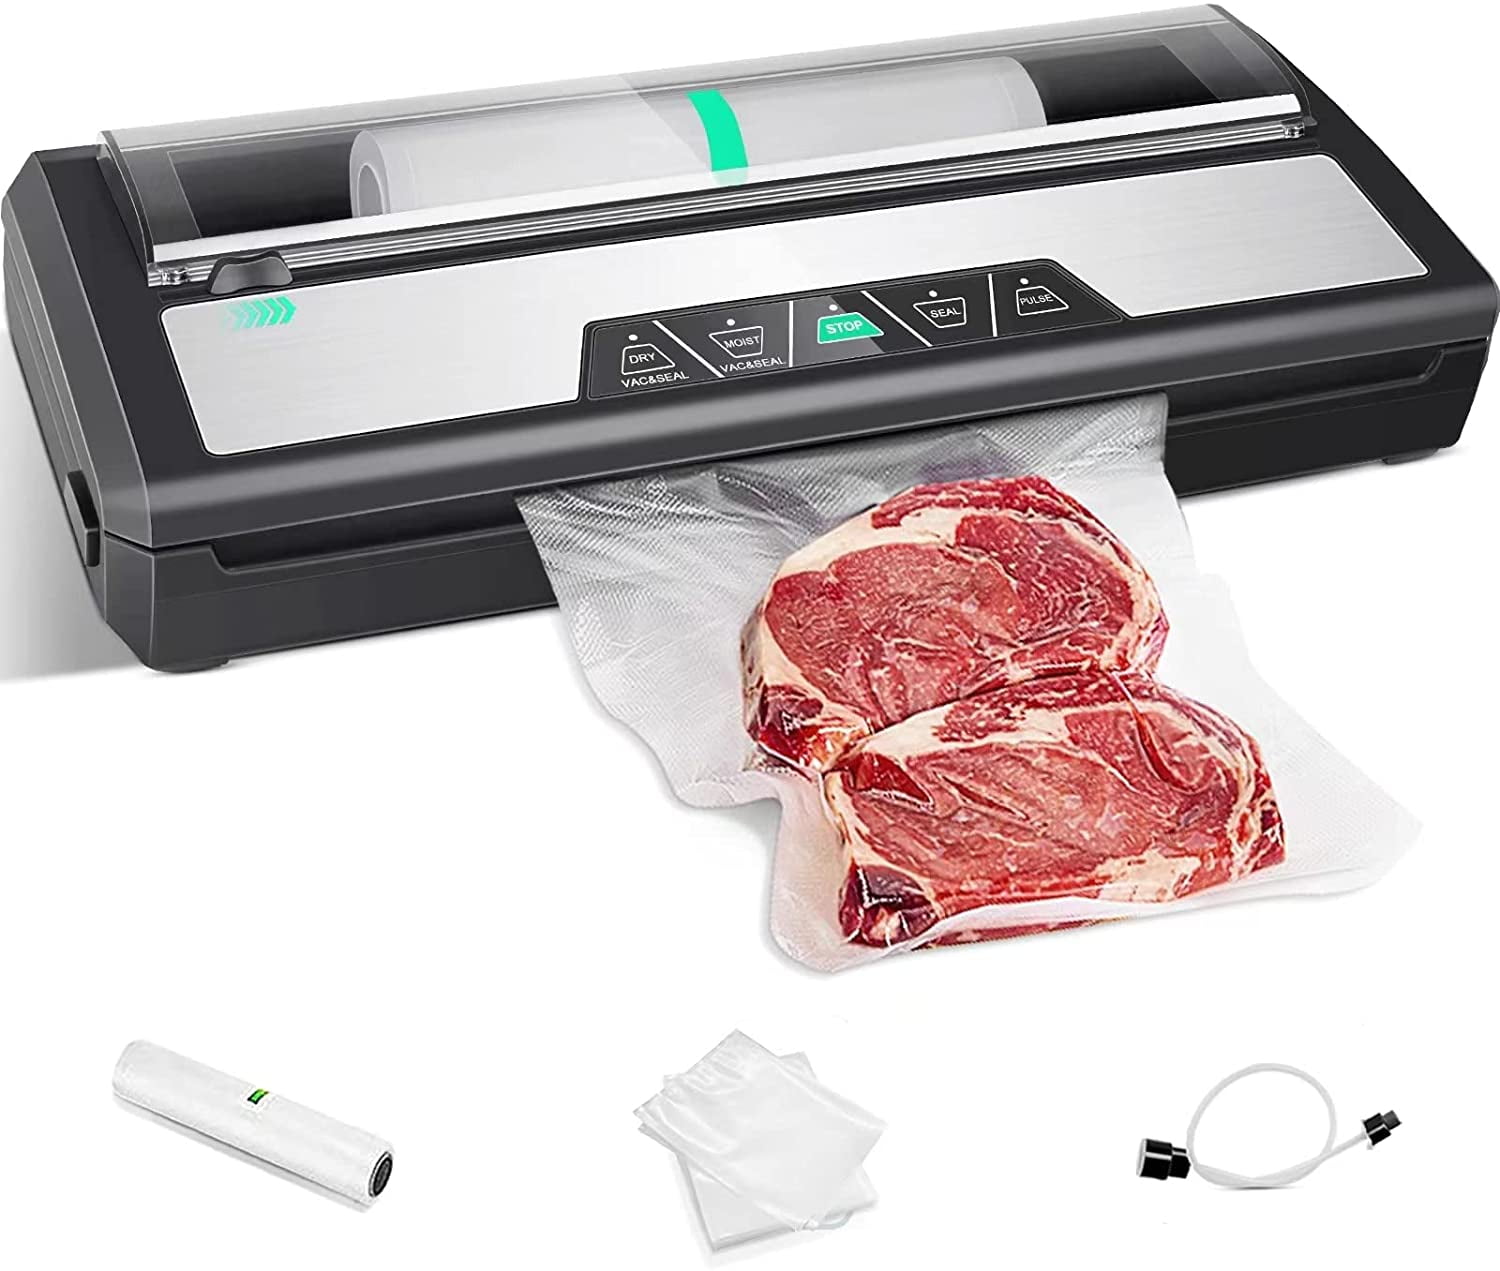  Automatic Food Vacuum Sealer System - 110W Sealed Meat Packing  Sealing Preservation Sous Vide Machine w/ 2 Seal Modes, Saver Vac Roll  Bags, Vacuum Air Hose - NutriChef PKVS35STS (Stainless Steel)